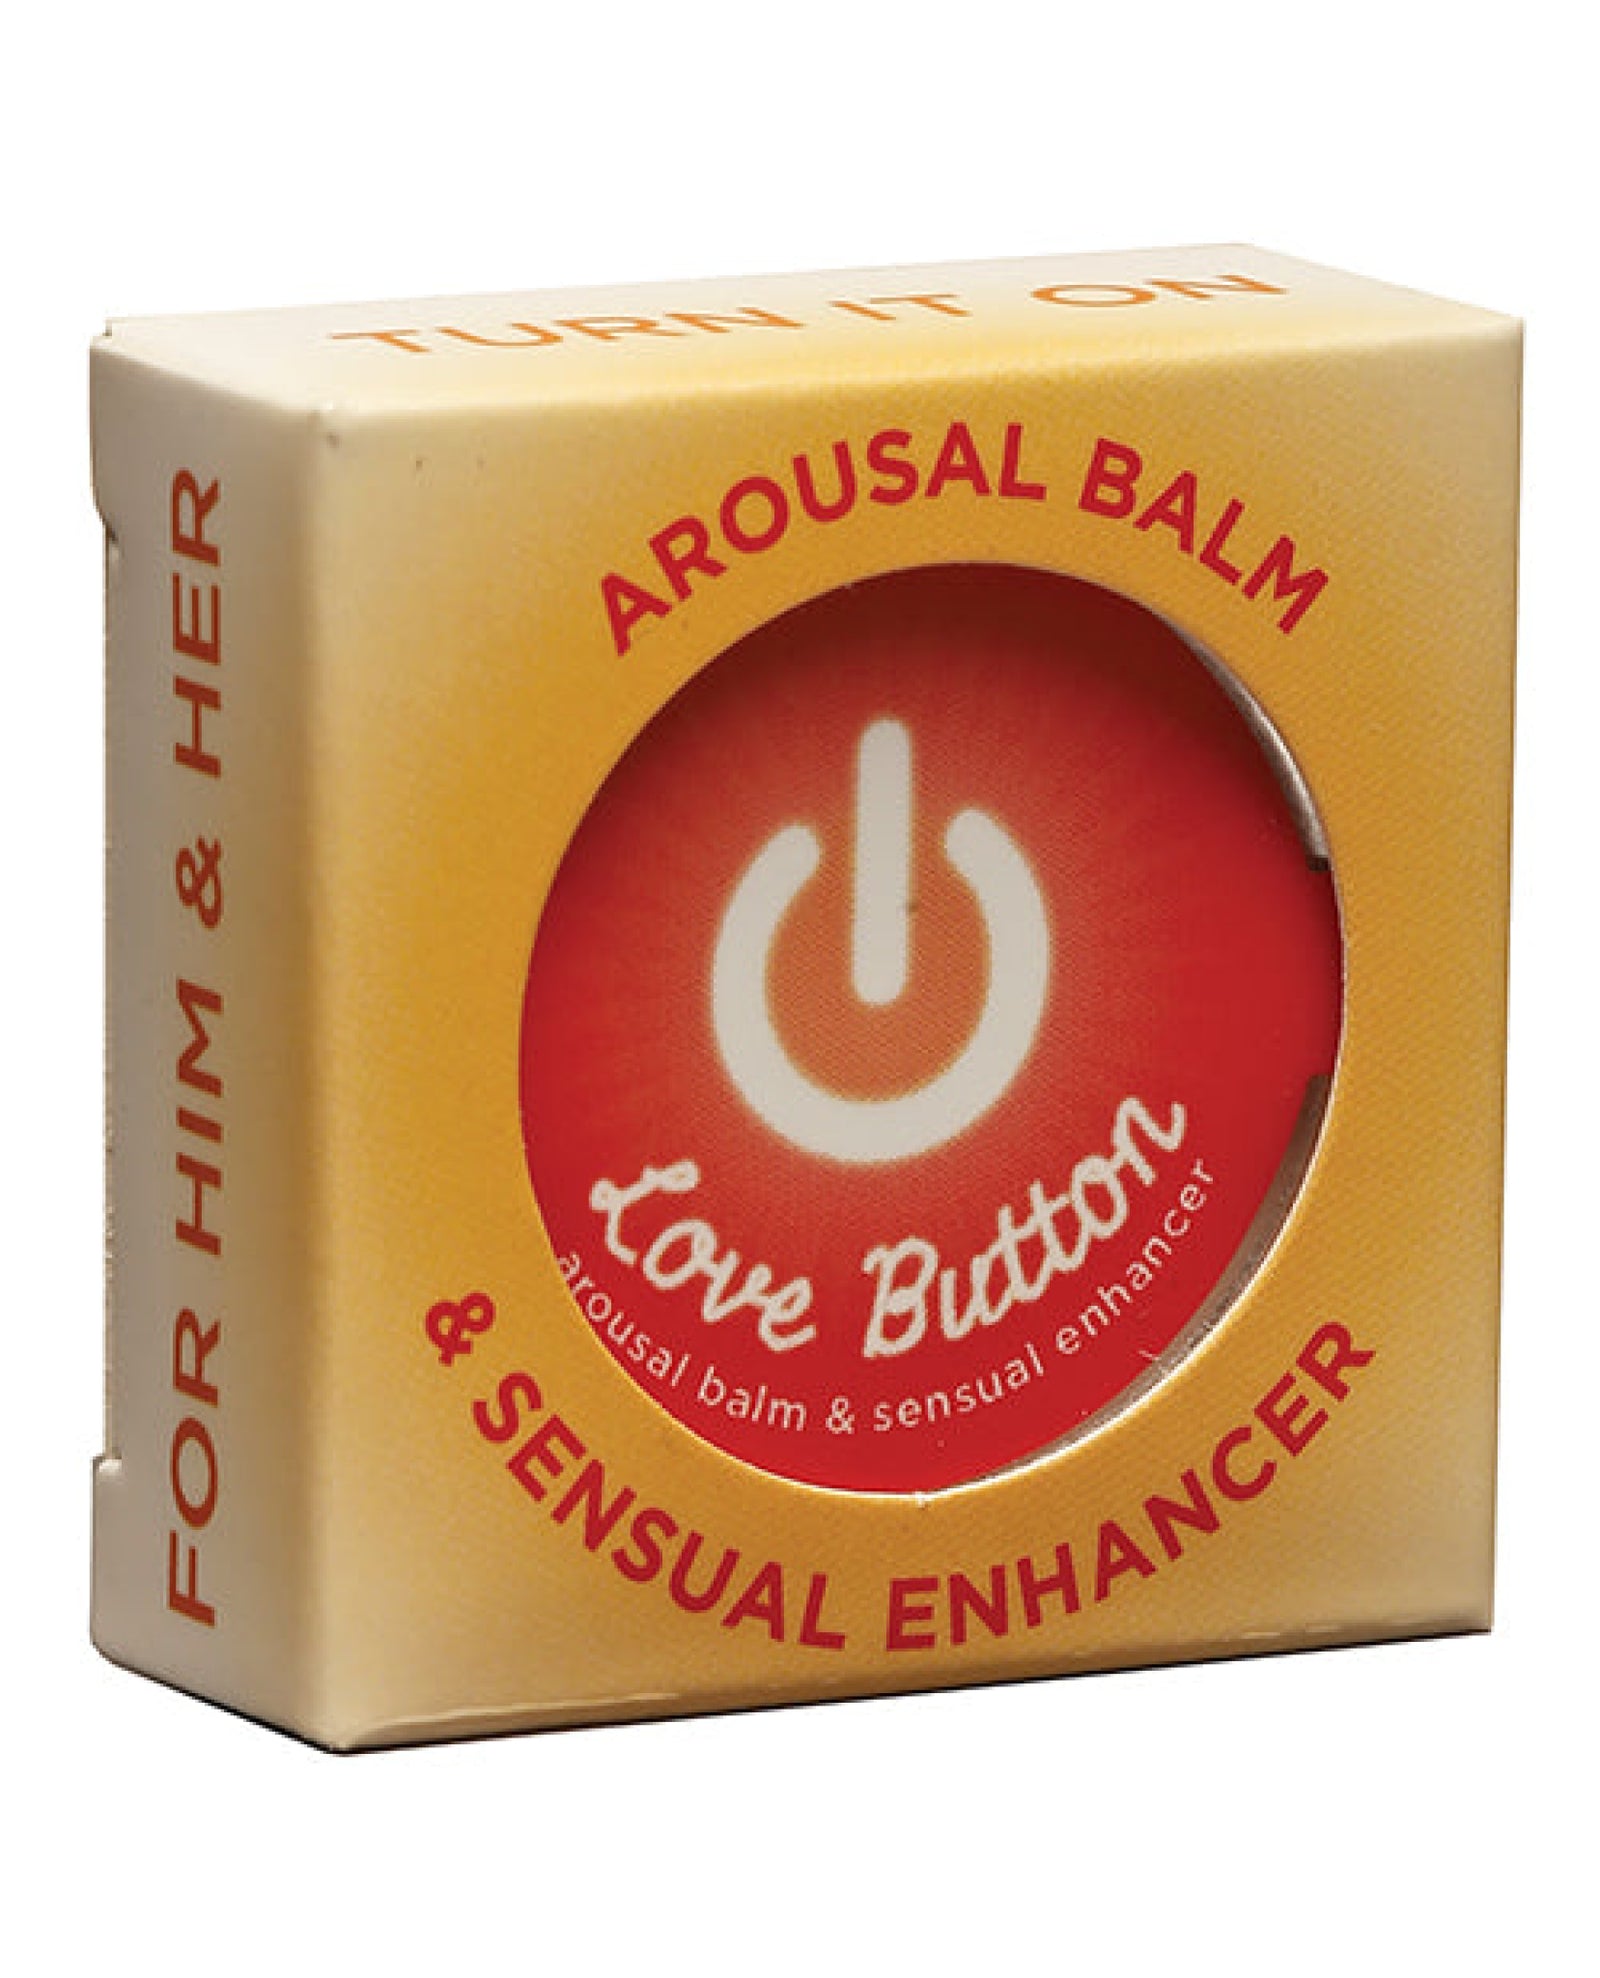 Earthly Body Love Button Arousal Balm For Him & Her Earthly Body